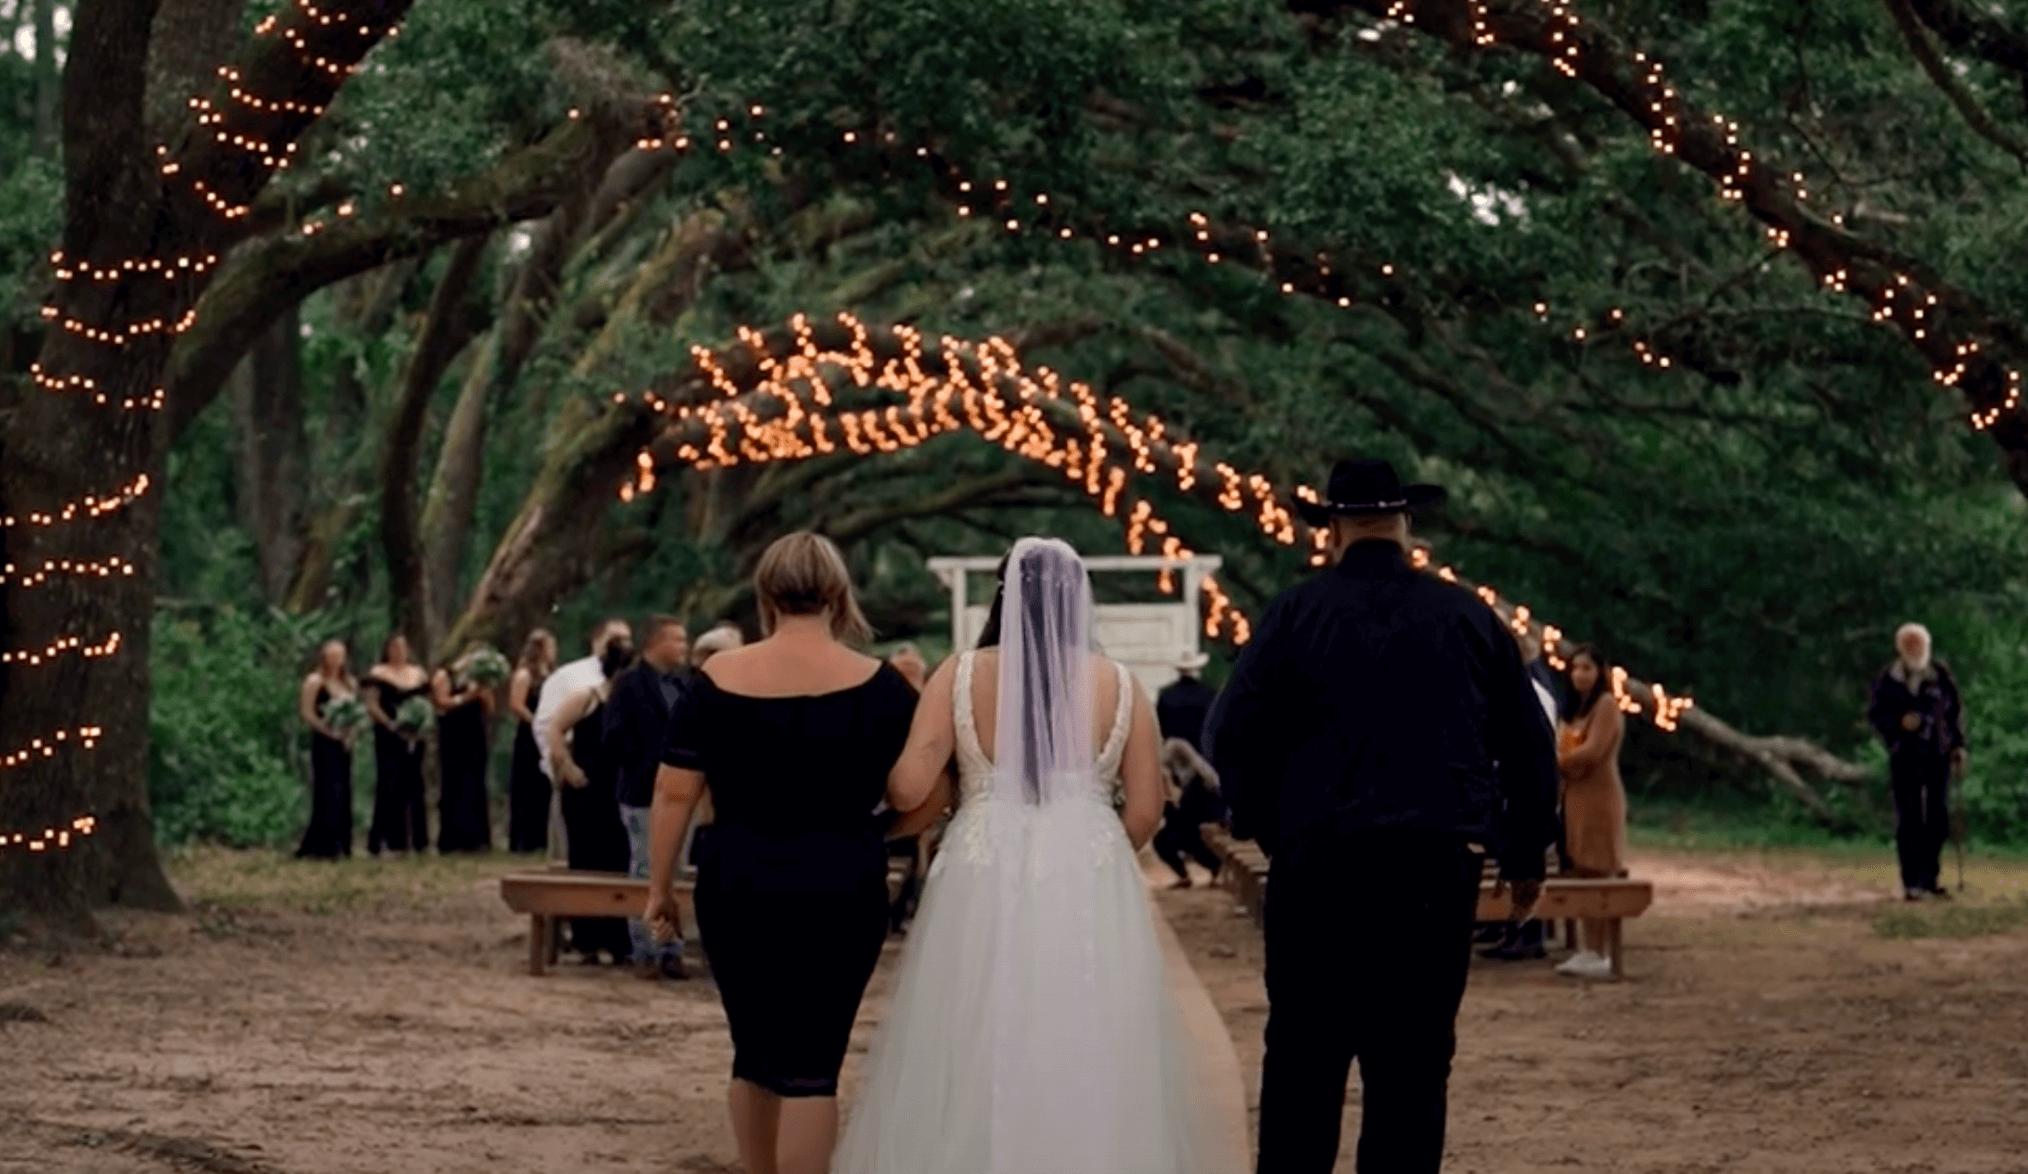 Bride walking down the aisle outside under a canopy of lit oak trees with her mom and dad